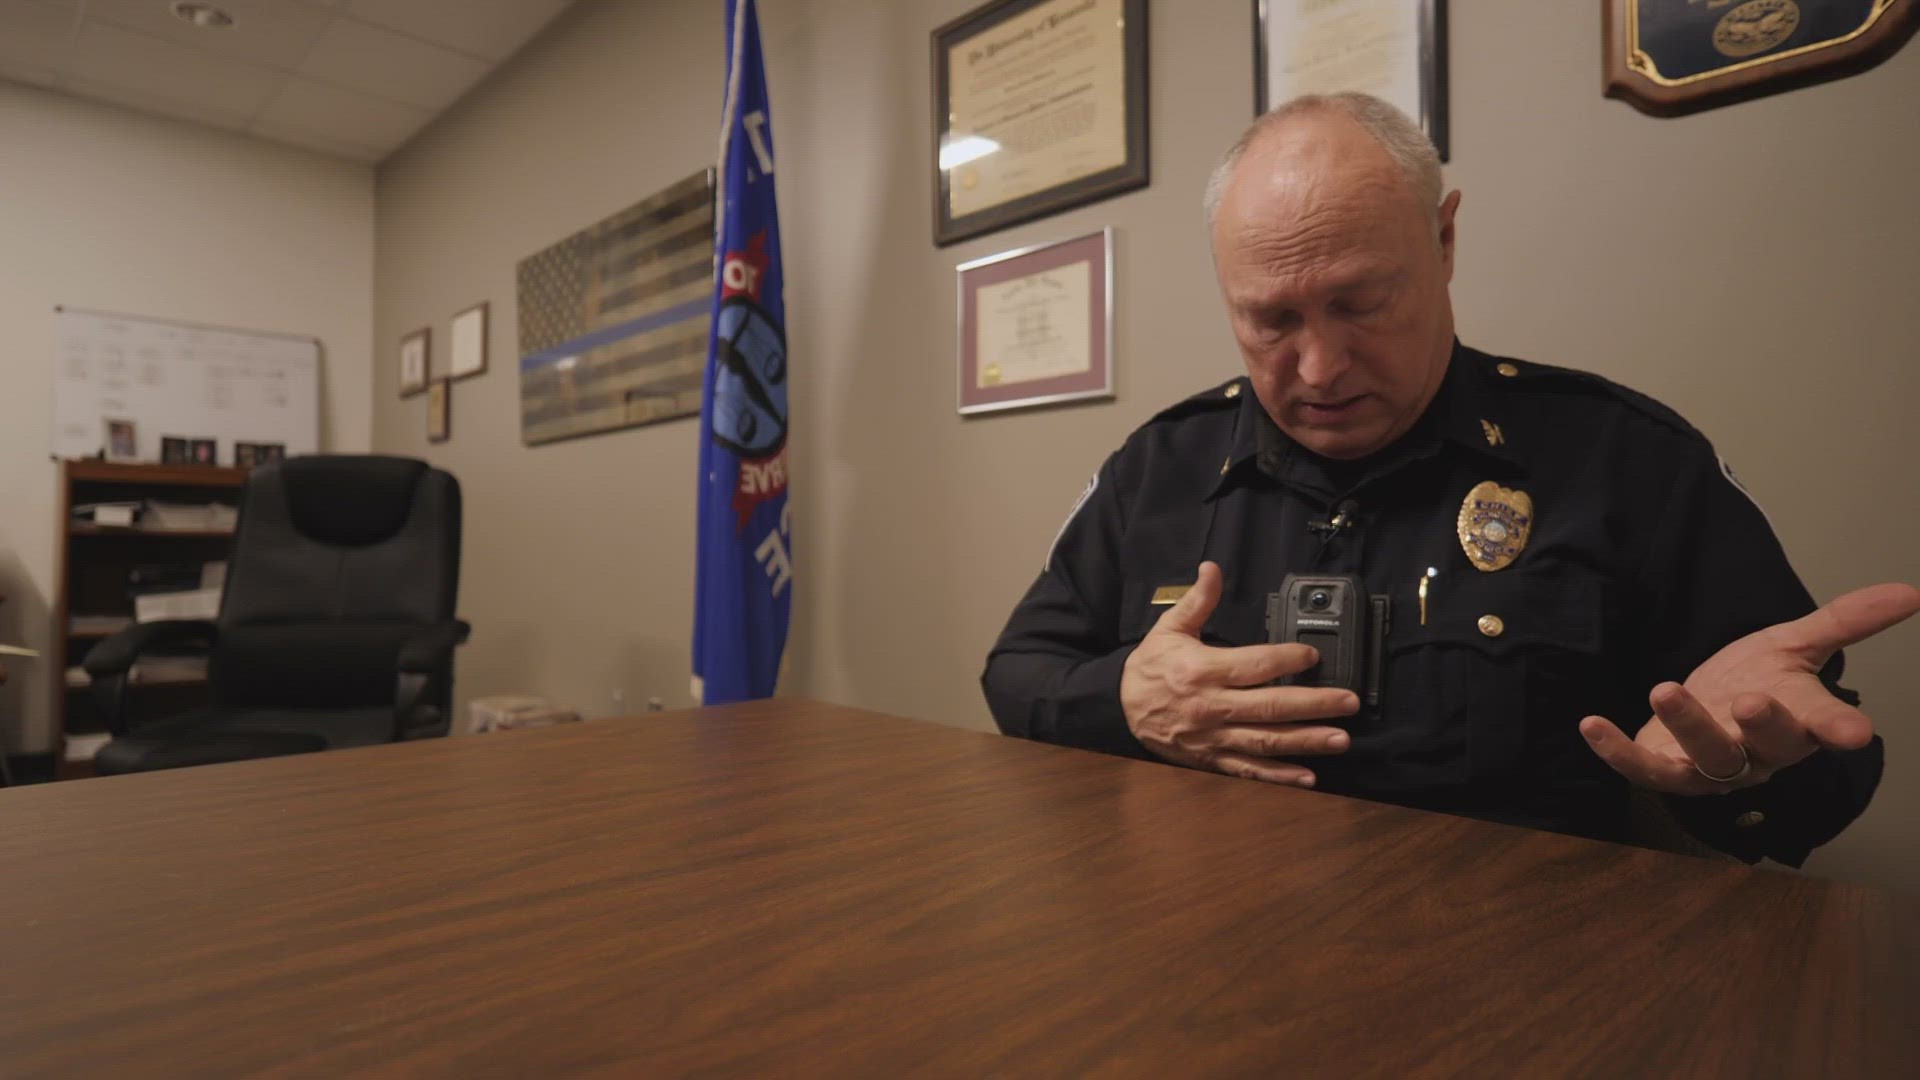 Since February 1st, body cams capture those millions at St. Matthews Police Department. Each of their 45 officers wears one, including Chief Barry Wilkerson.